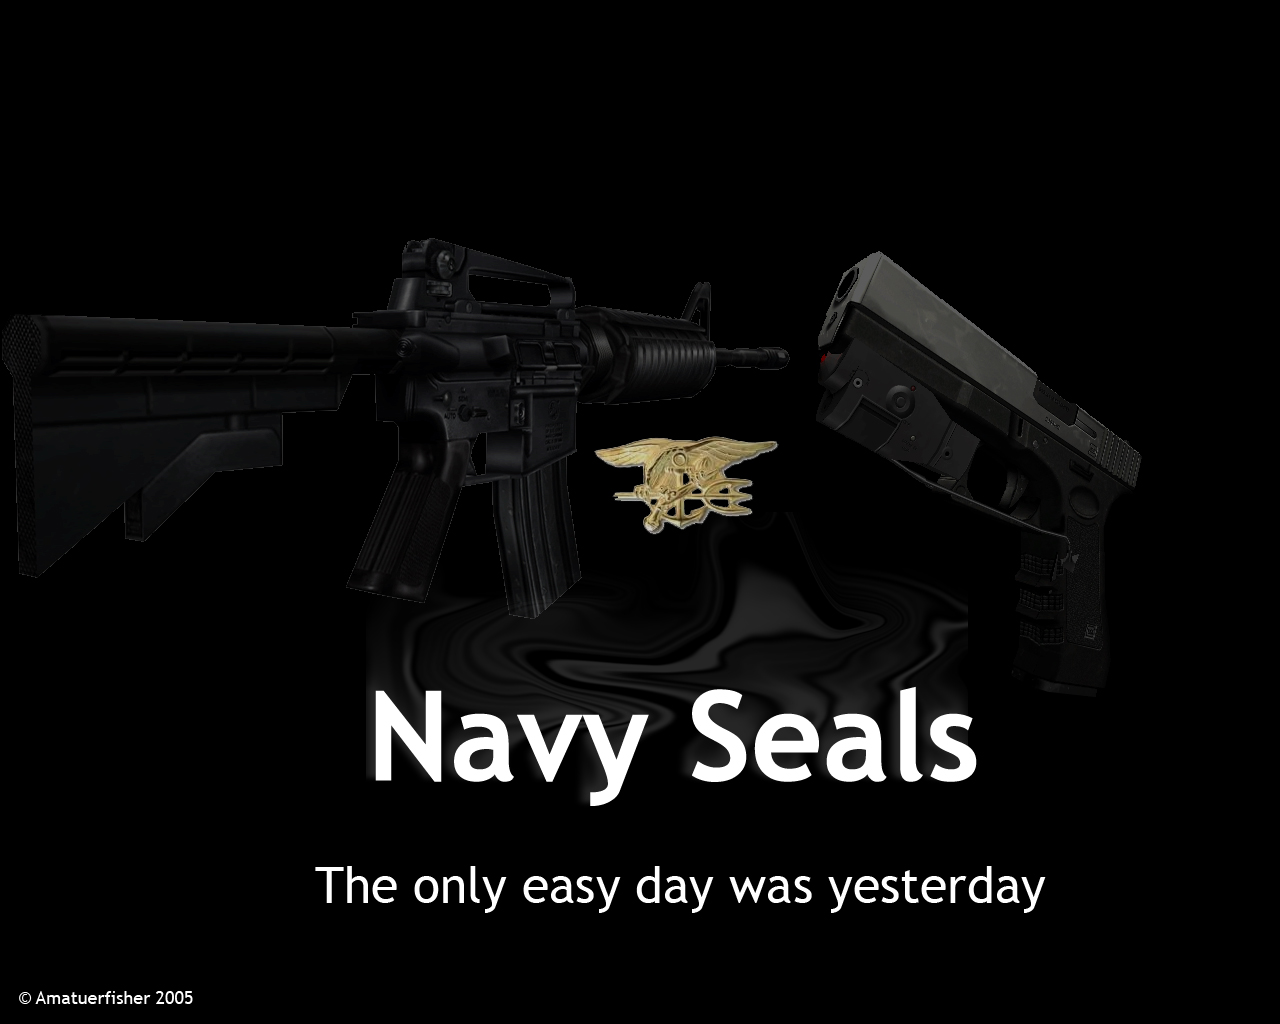 Navy Seal Wallpapers and Background Images stmednet